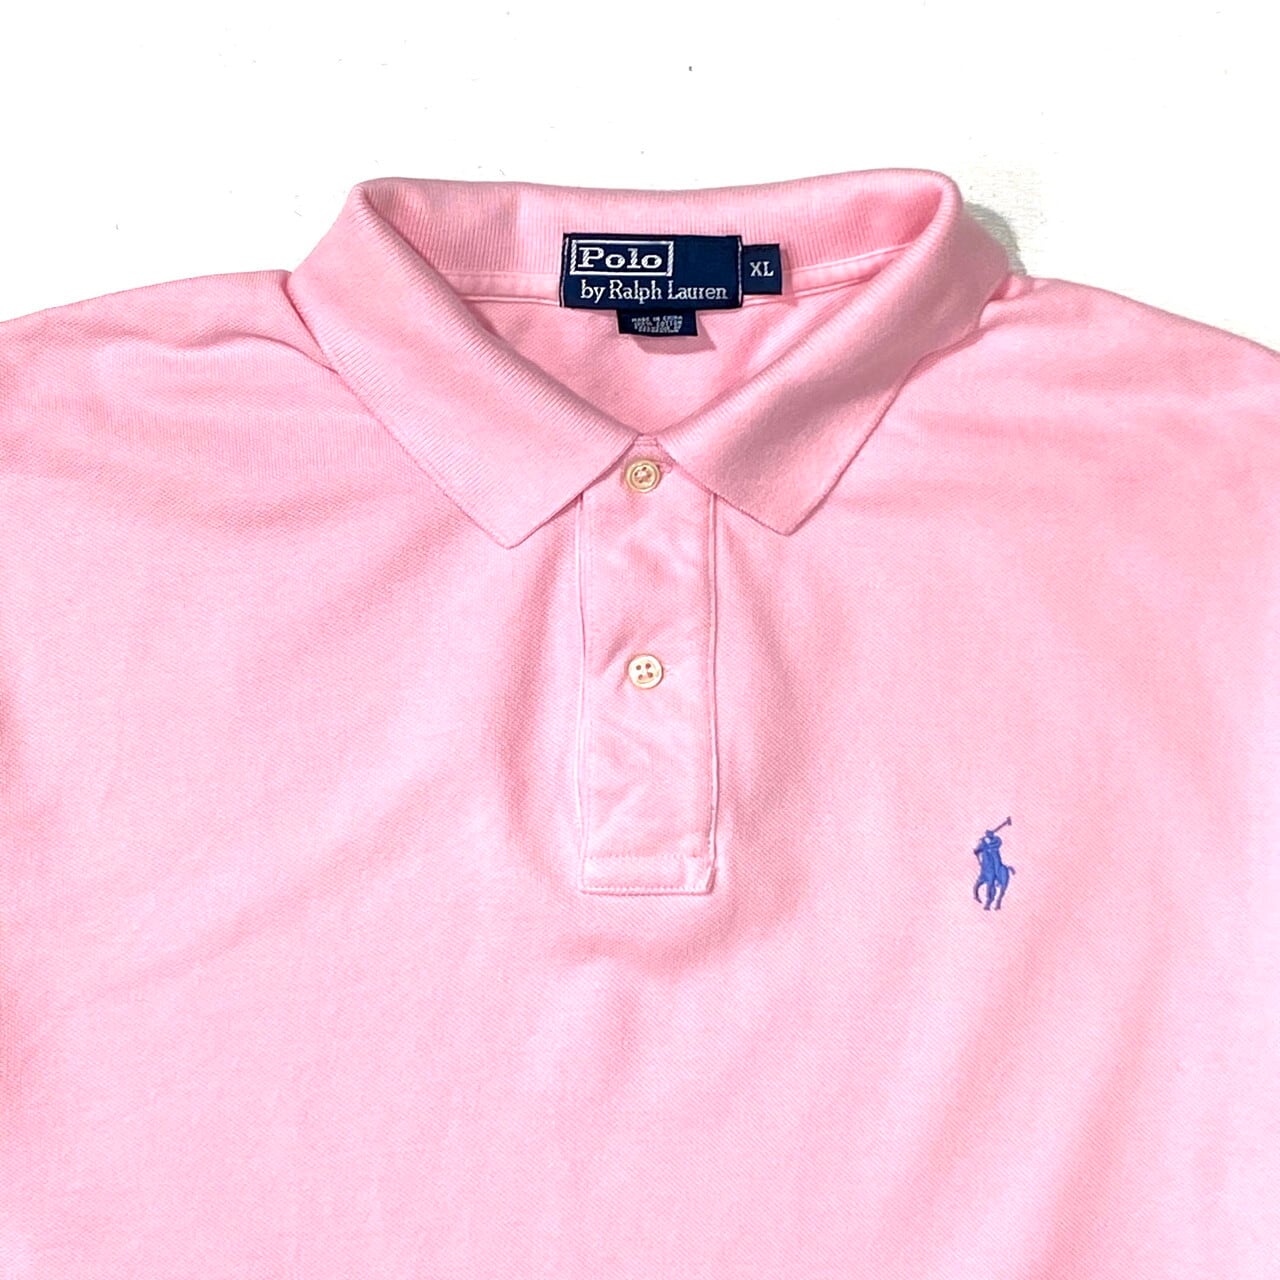 POLO by Ralph Lauren ラルフローレン ポロシャツ メンズXL　ピンク  古着【ポロシャツ】【CS2301-50】【PD20】【AN20】 | cave 古着屋【公式】古着通販サイト powered by BASE